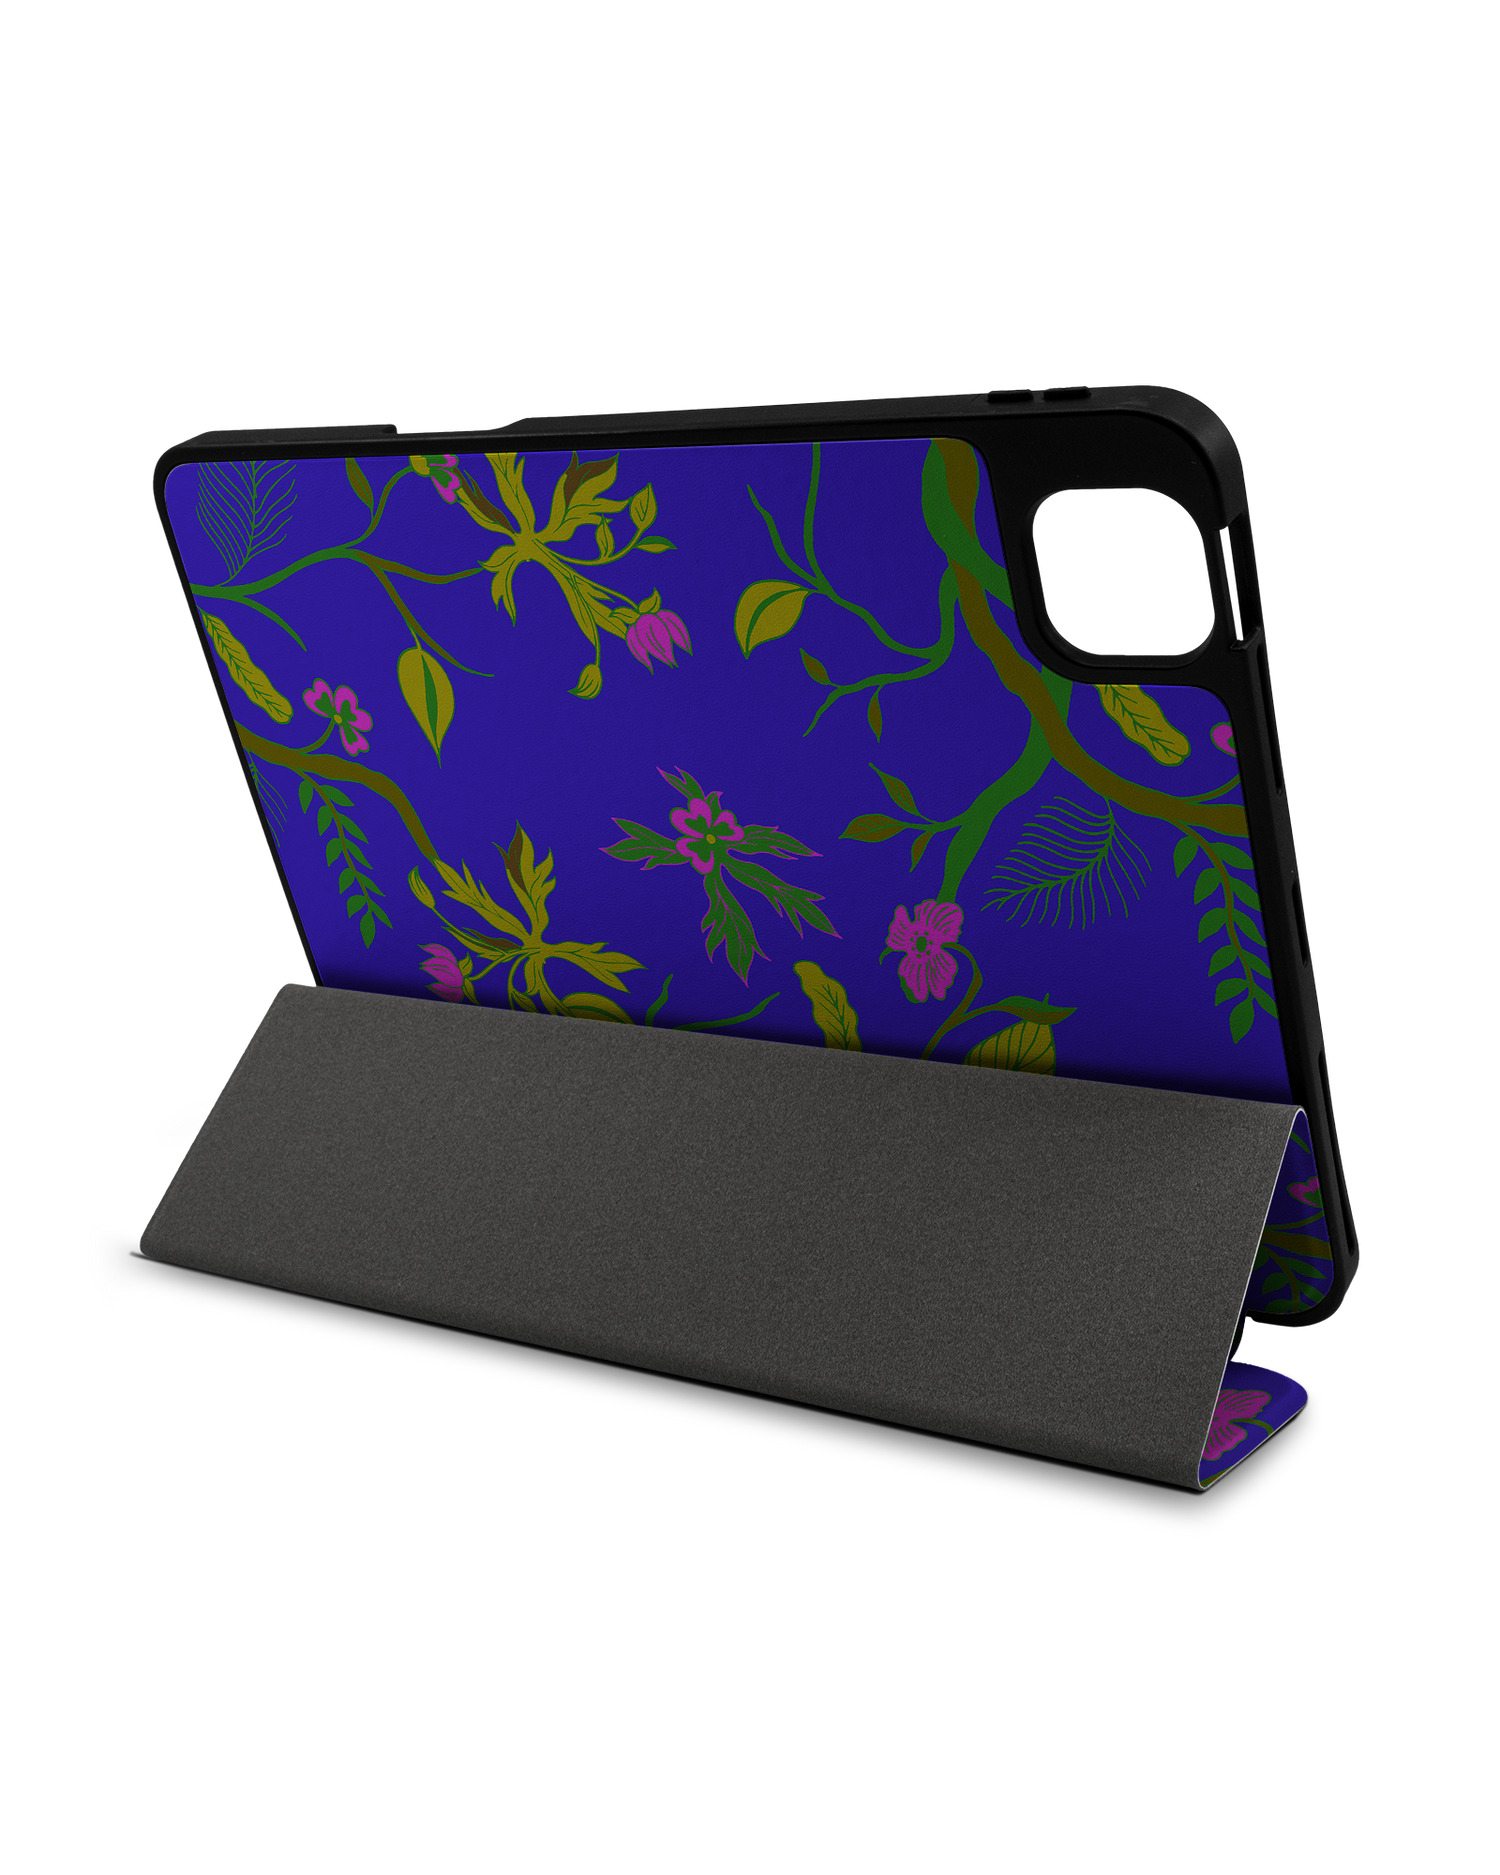 Ultra Violet Floral iPad Case with Pencil Holder Apple iPad Pro 11